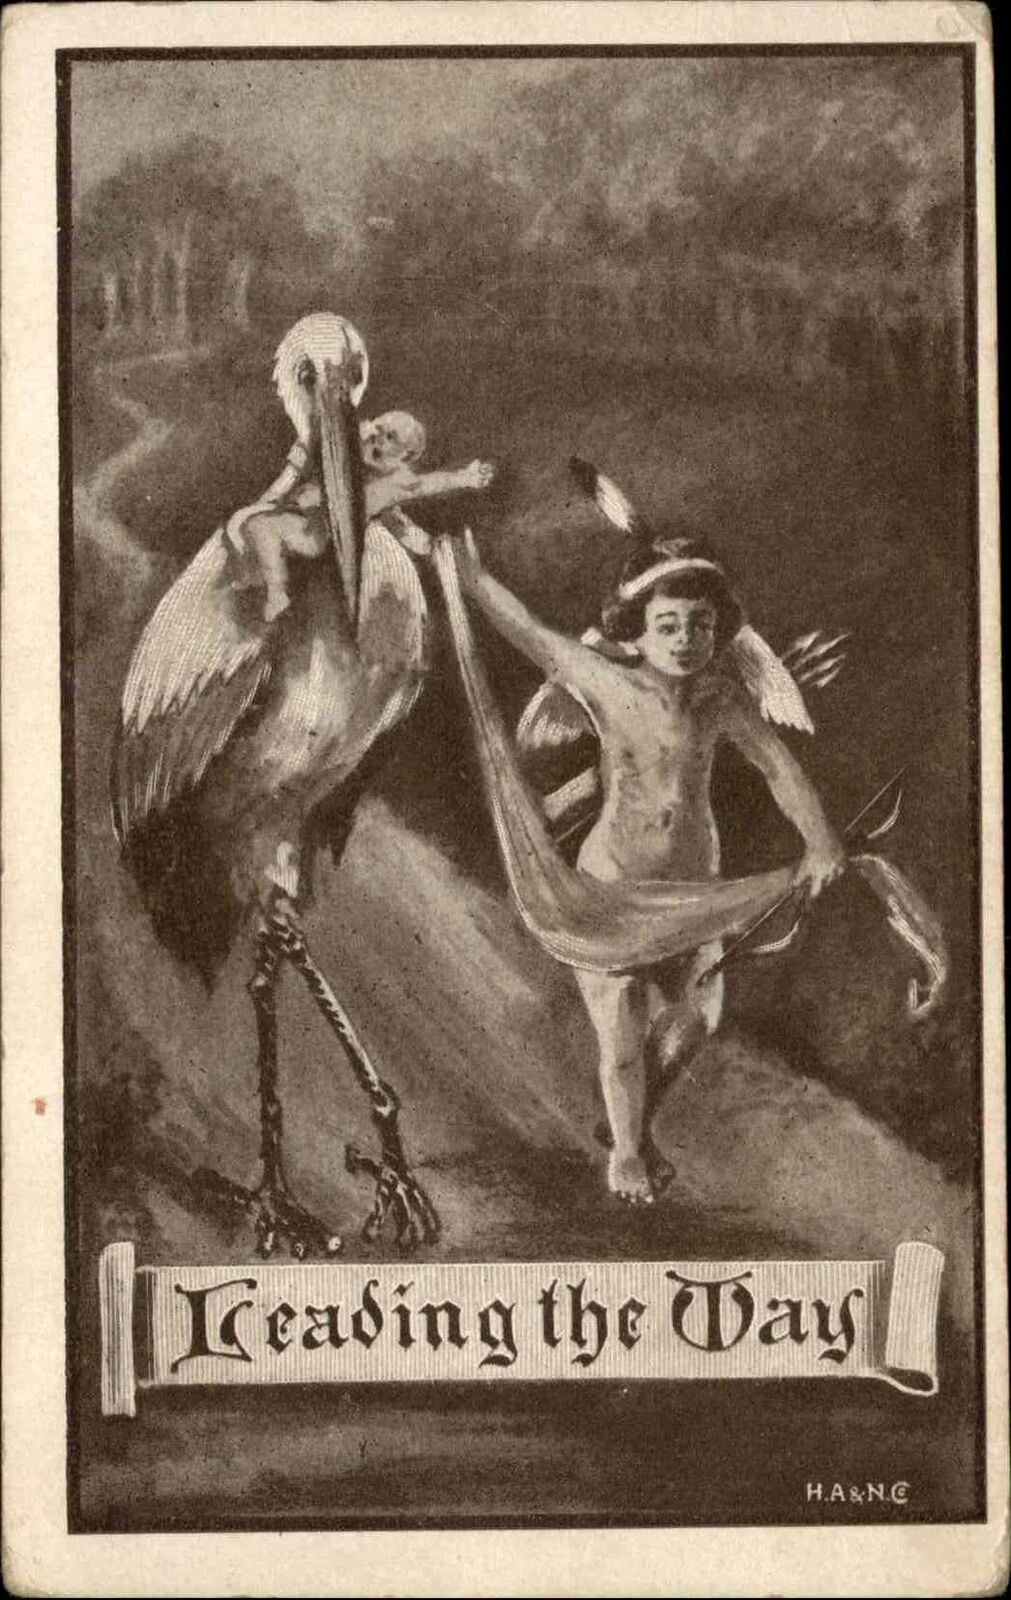 Stork Fantasy Indigenous Child Indian with Stork and Baby c1910 Vintage Postcard